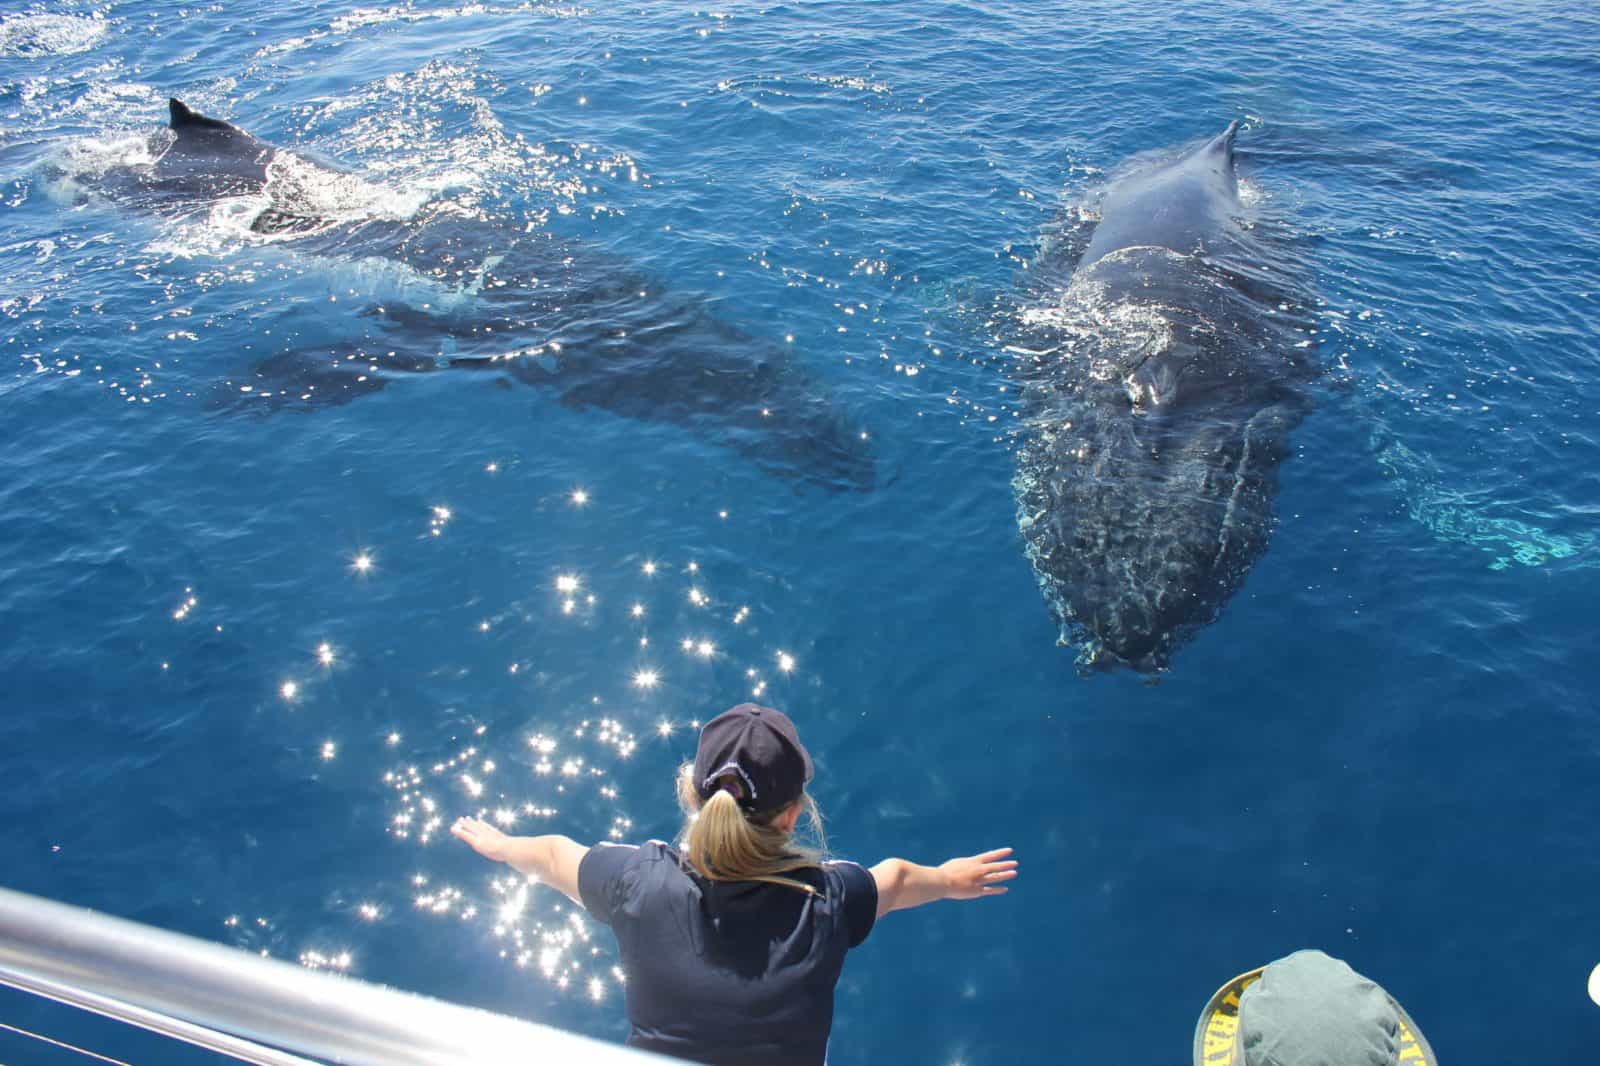 Two whales close to the boat interacting with the passengers and crew